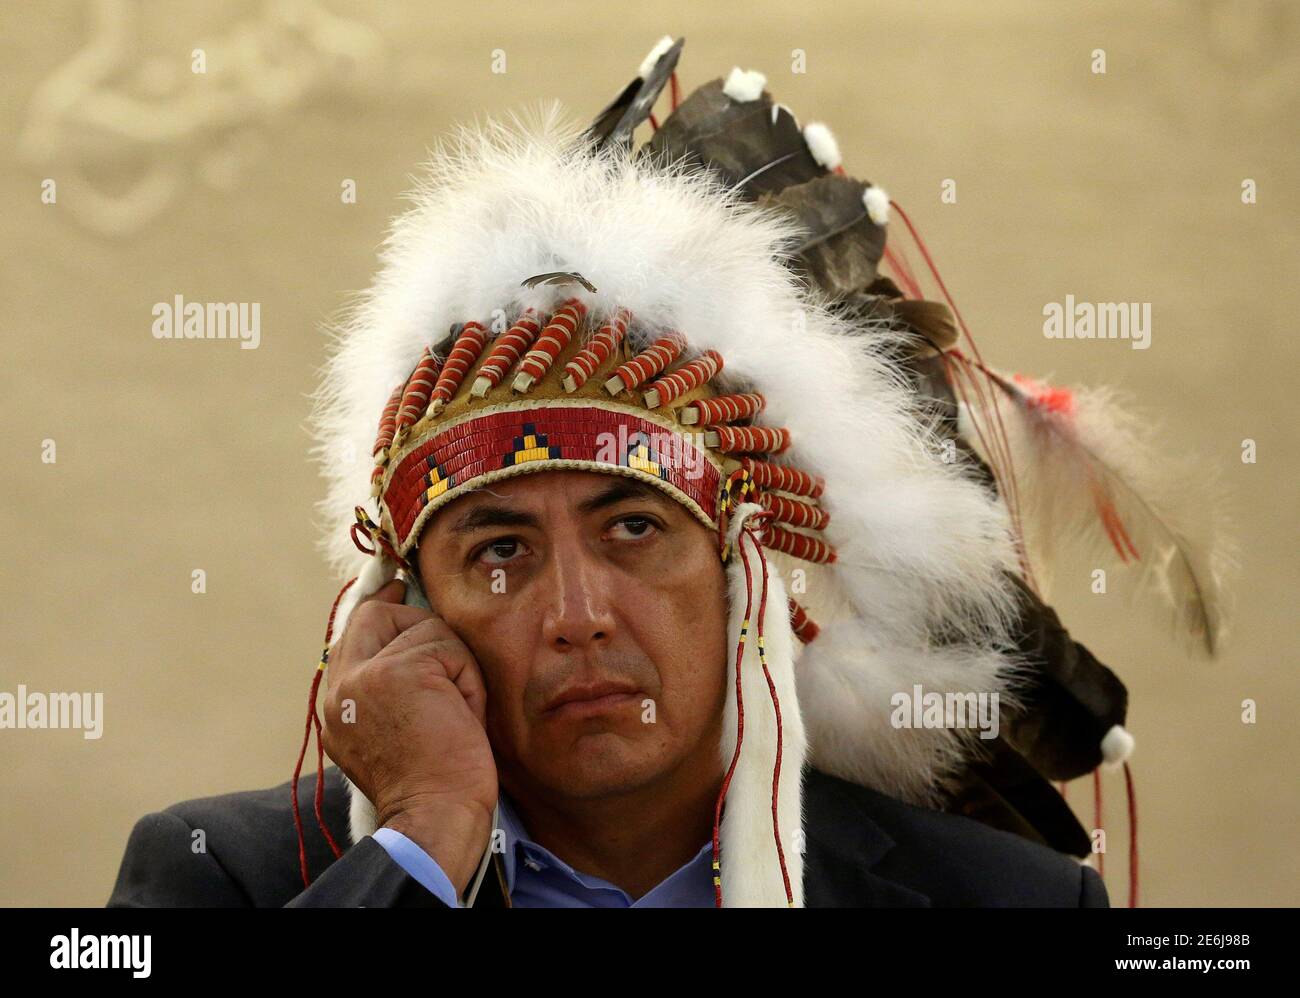 Dave Archambault II, chairman of the Standing Rock Sioux tribe, waits to give his speech against the Energy Transfer Partners' Dakota Access oil pipeline during the Human Rights Council at the United Nations in Geneva, Switzerland September 20, 2016. REUTERS/Denis Balibouse Stock Photo